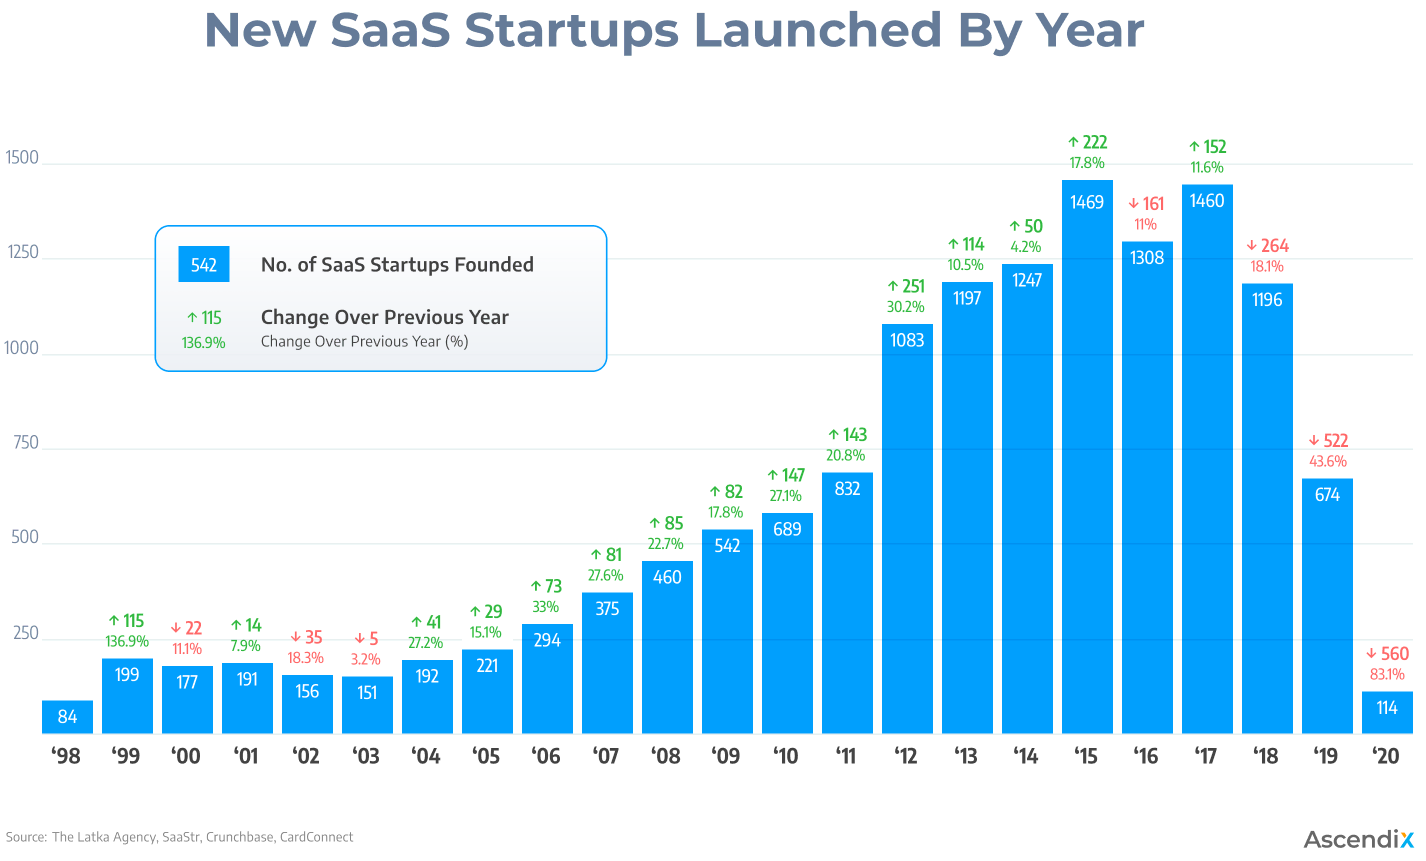 New SaaS Startups Launched By Year